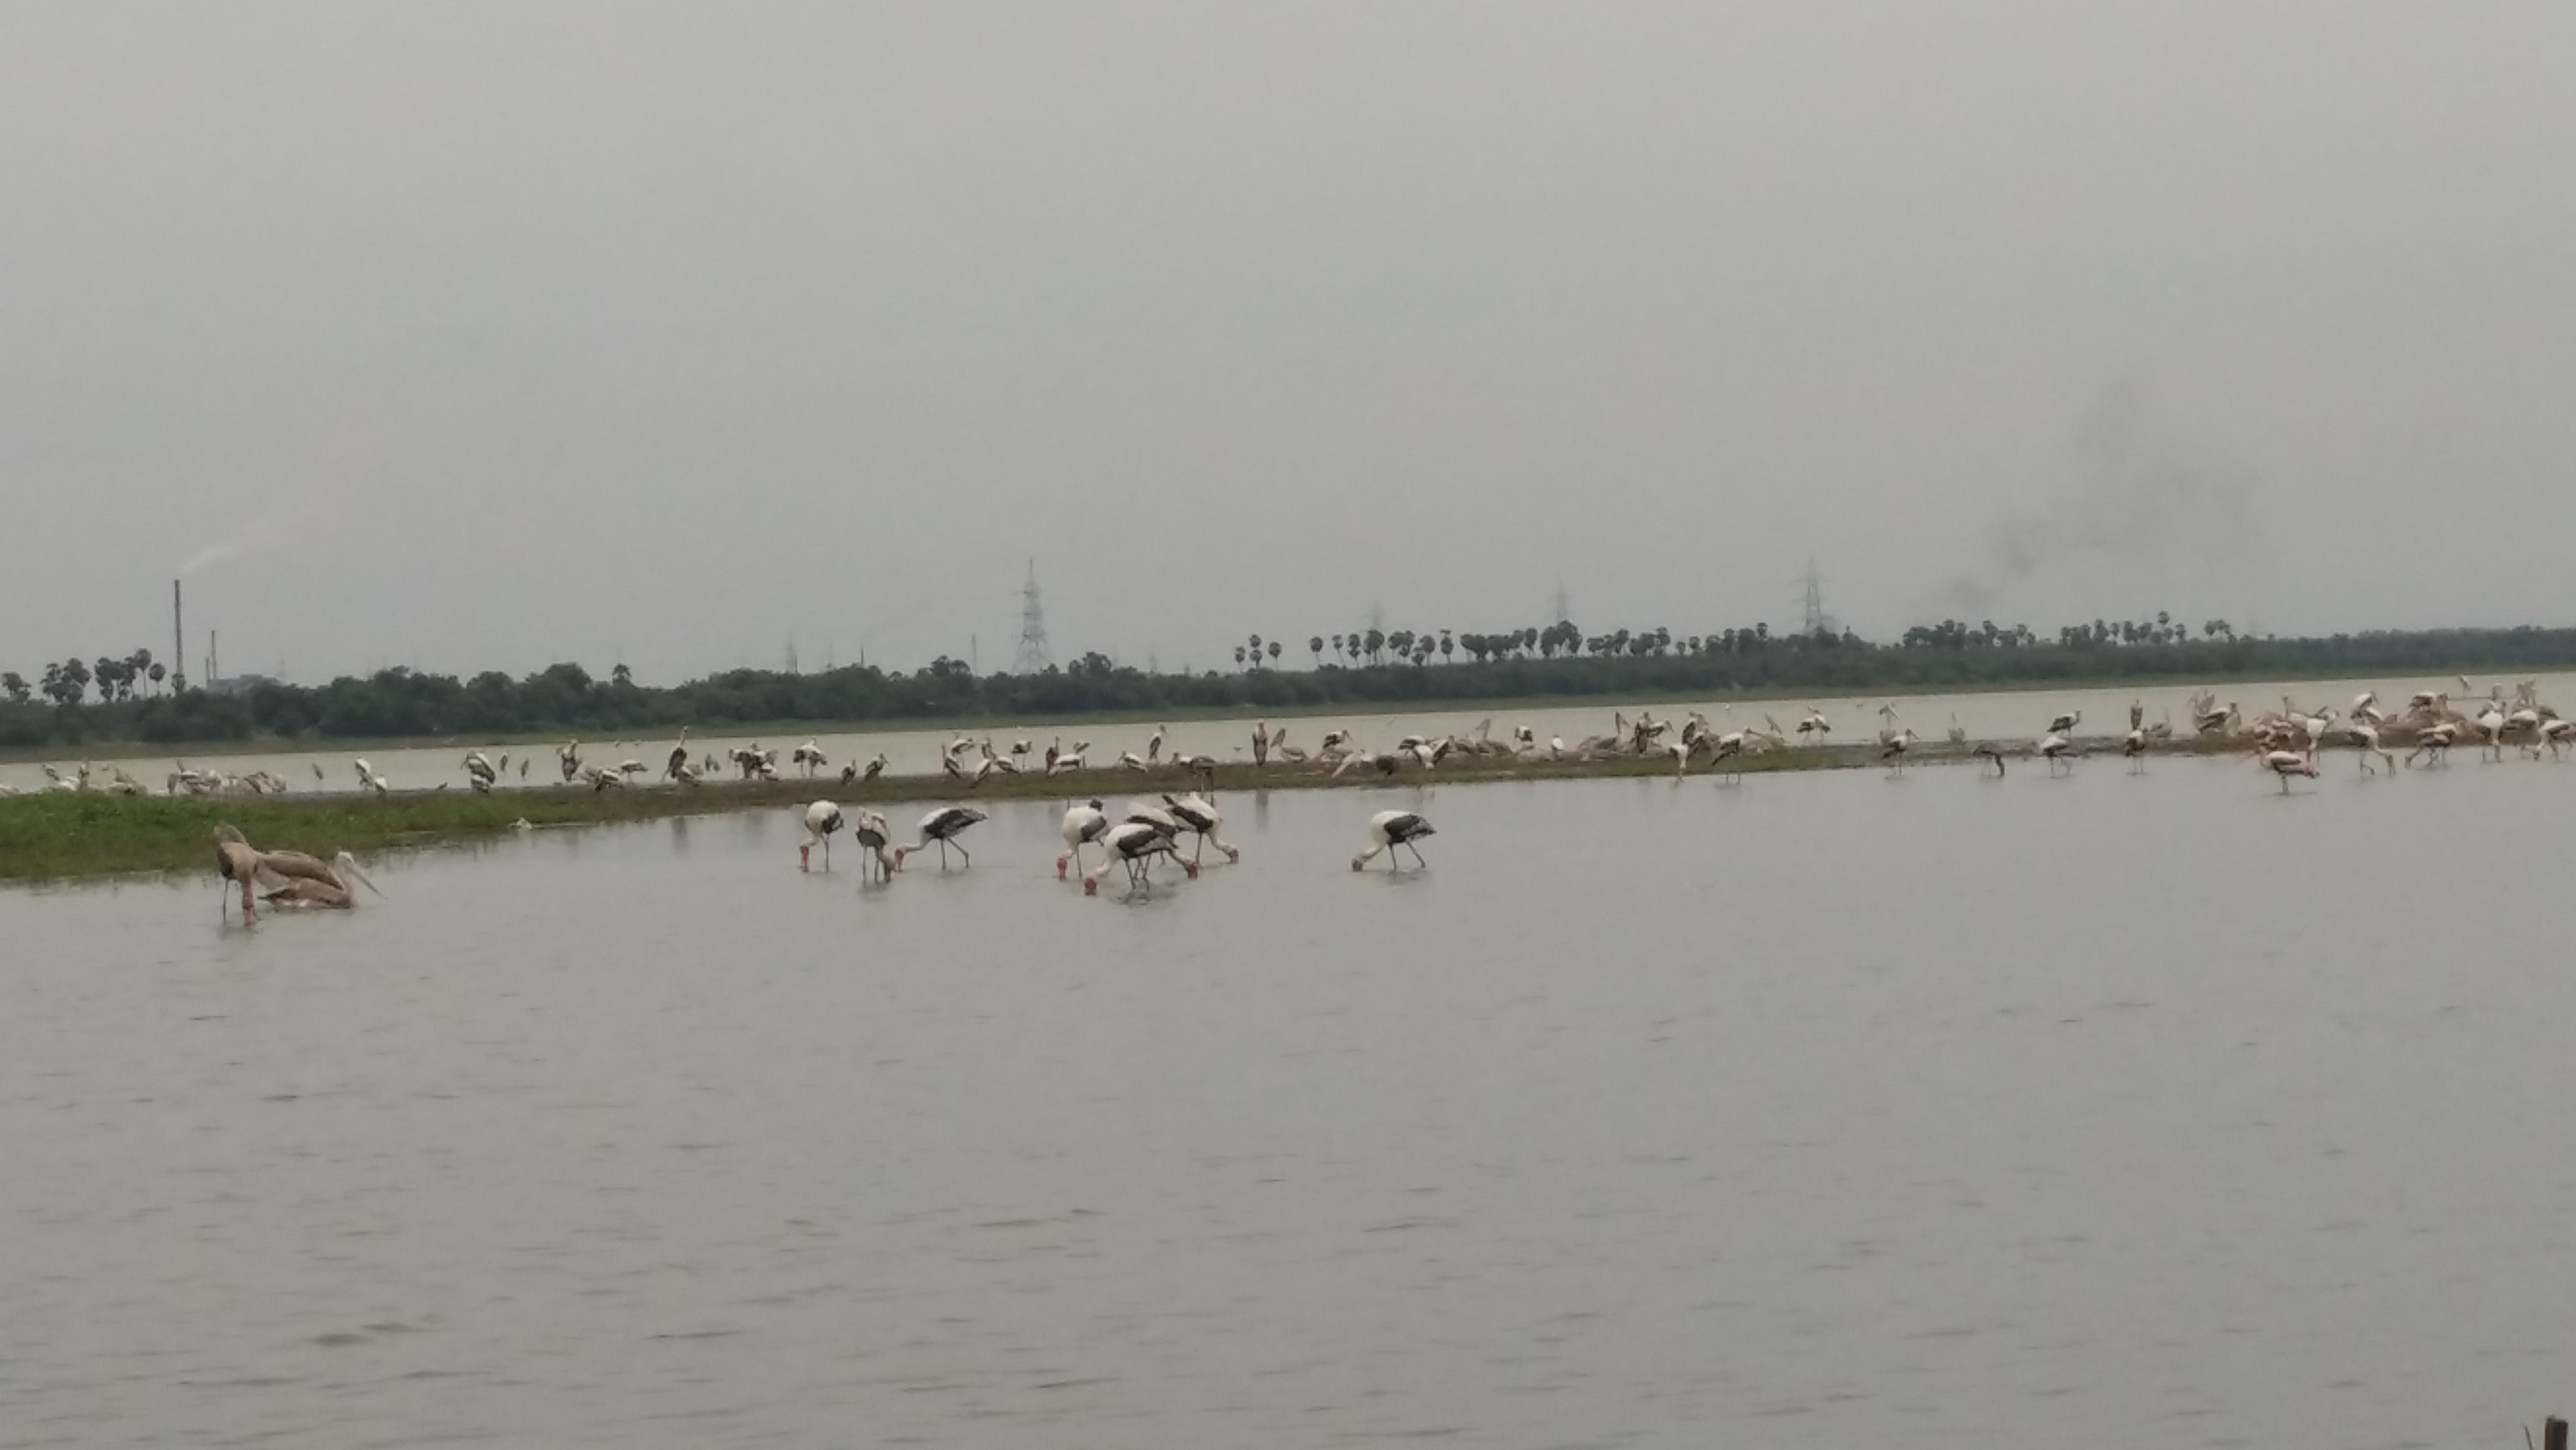 A large body of water with trees and vegetation in the background. In the foreground there are many large white and grey birds walking through the water. Some are standing with their heads under the surface.